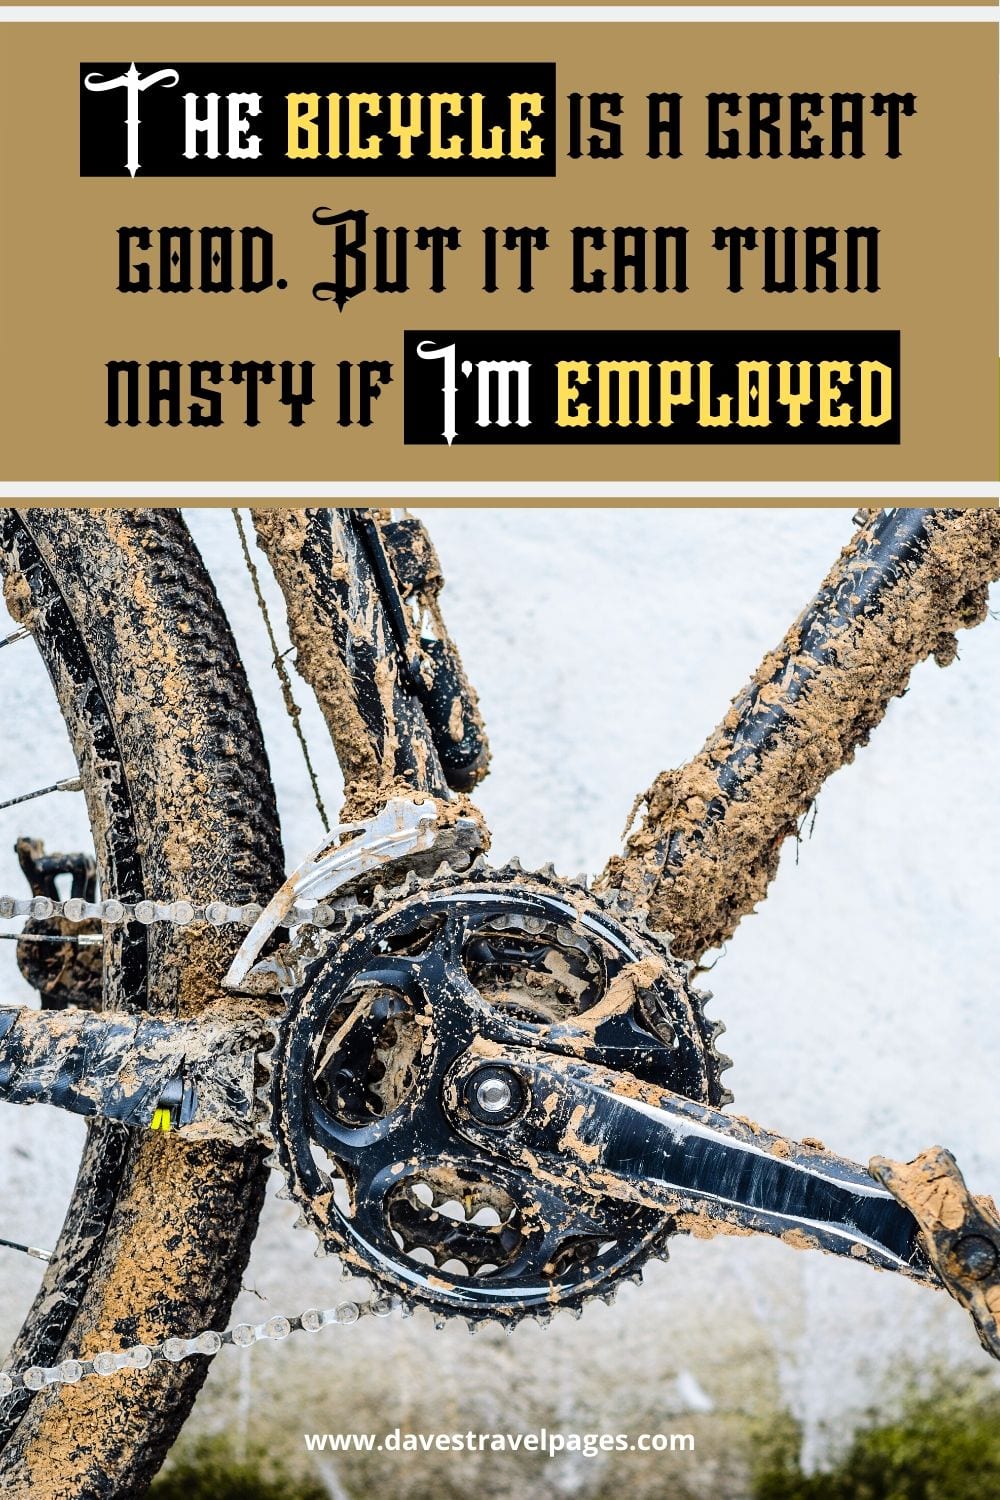 The bicycle is a great good. But it can turn nasty if I’m employed. ~ Samuel Beckett